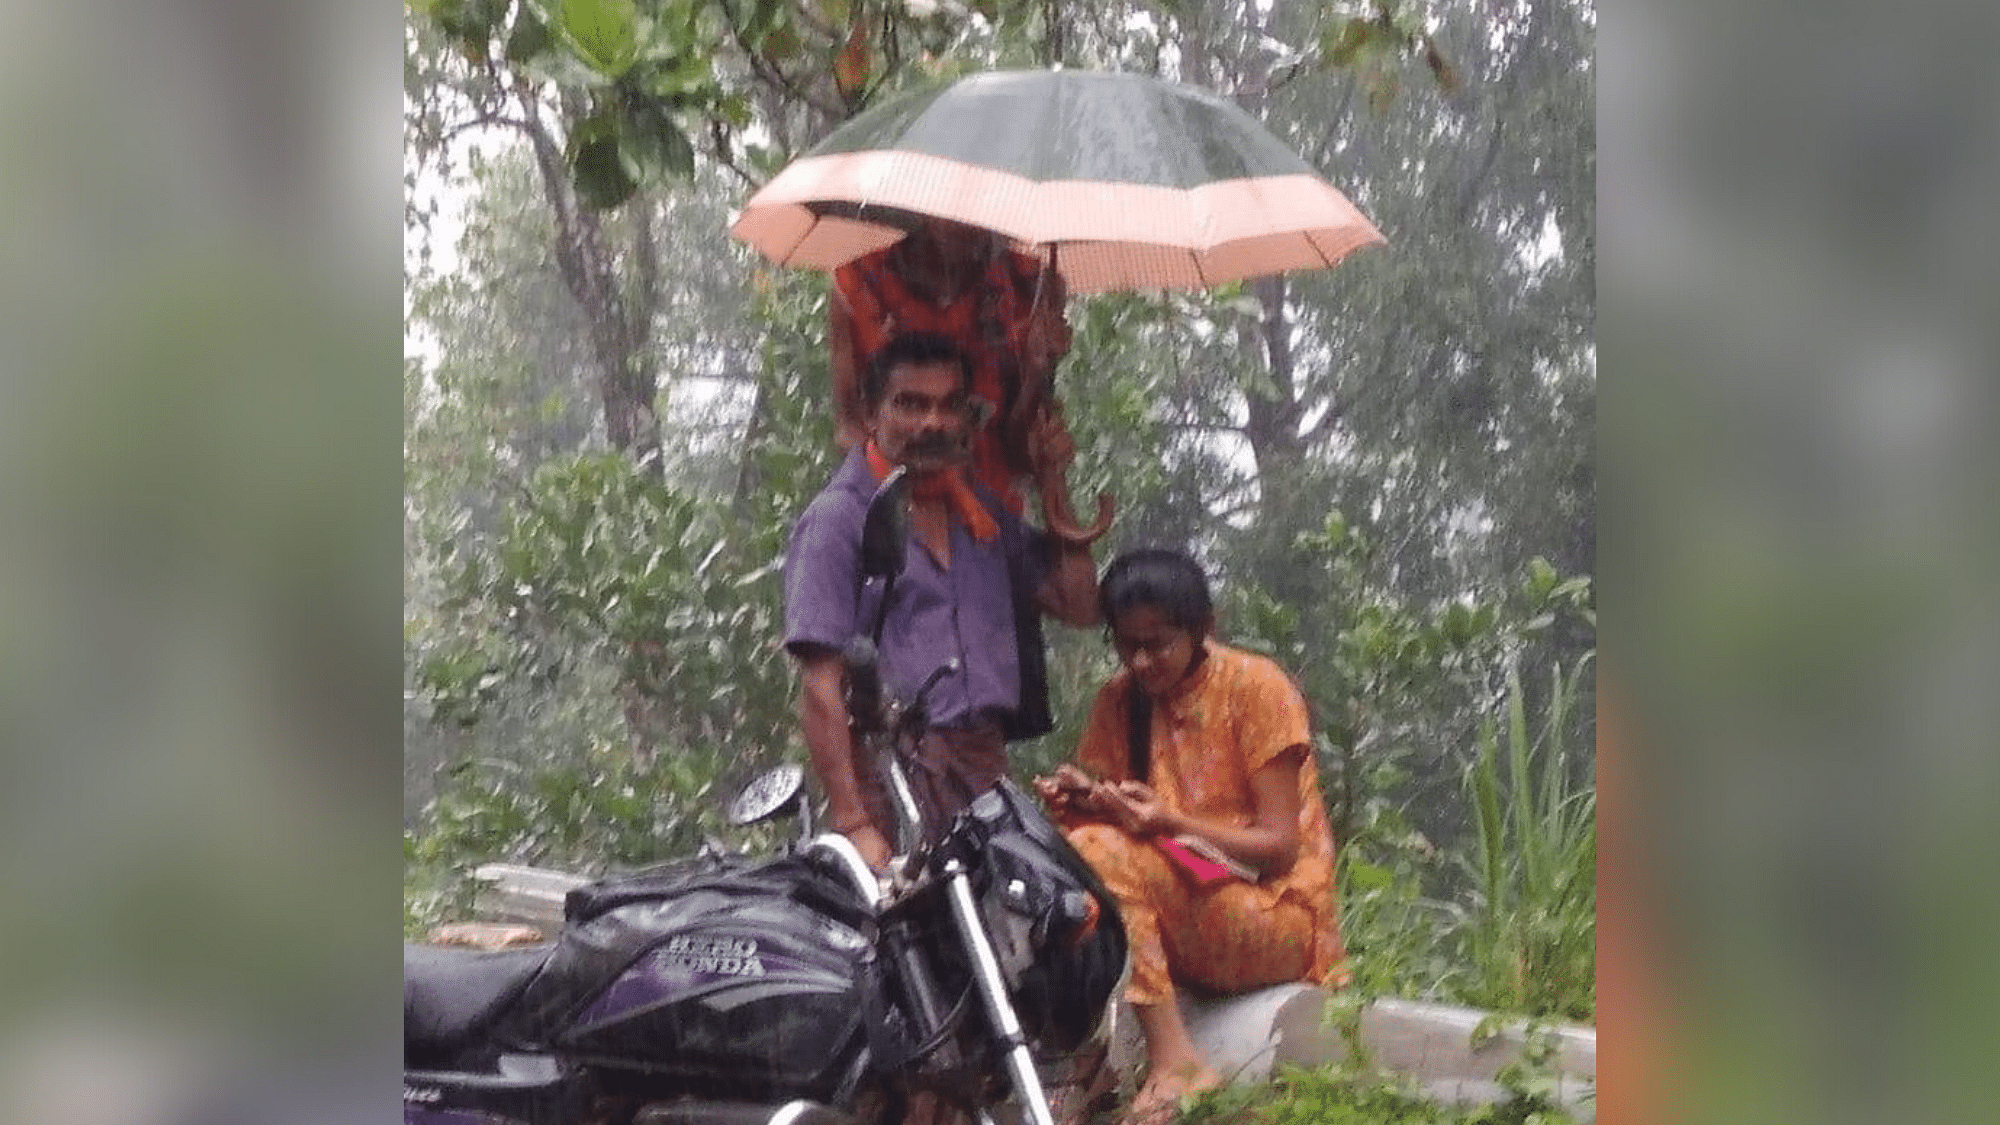 <div class="paragraphs"><p>Father holds umbrella for daughter as she attends online classes by the roadside.</p></div>